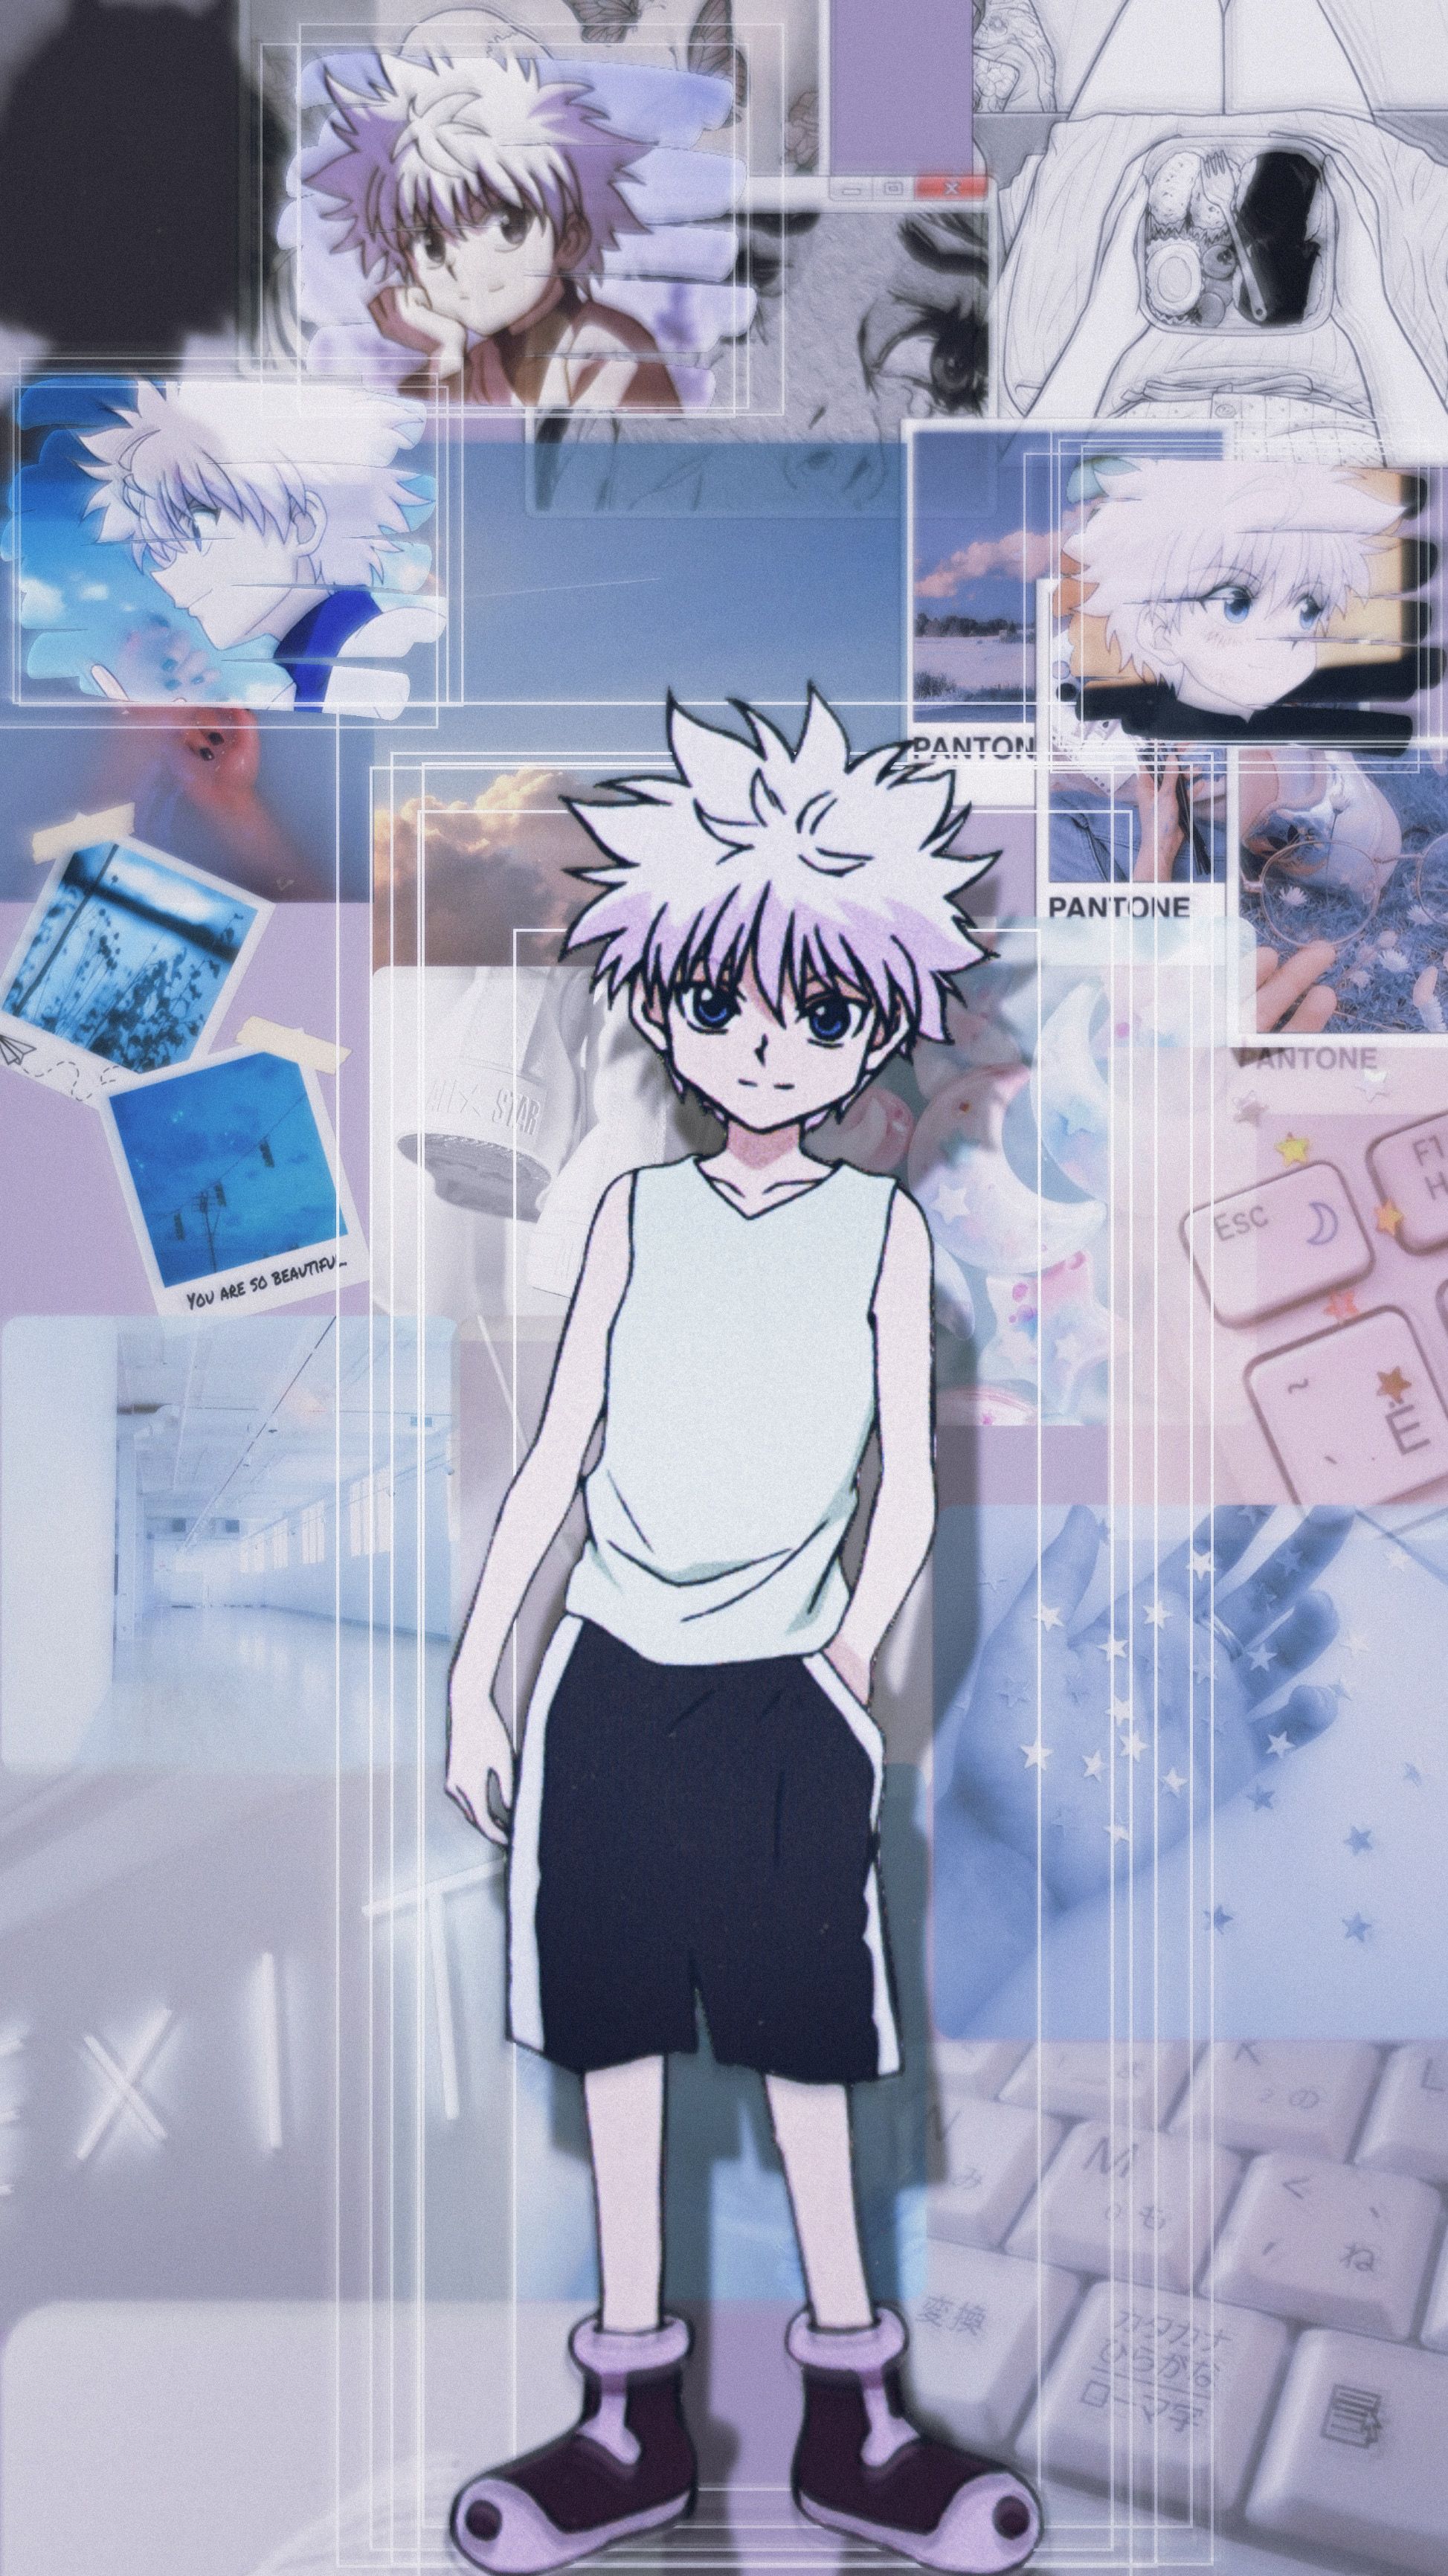 A picture of anime characters on the wall - Killua